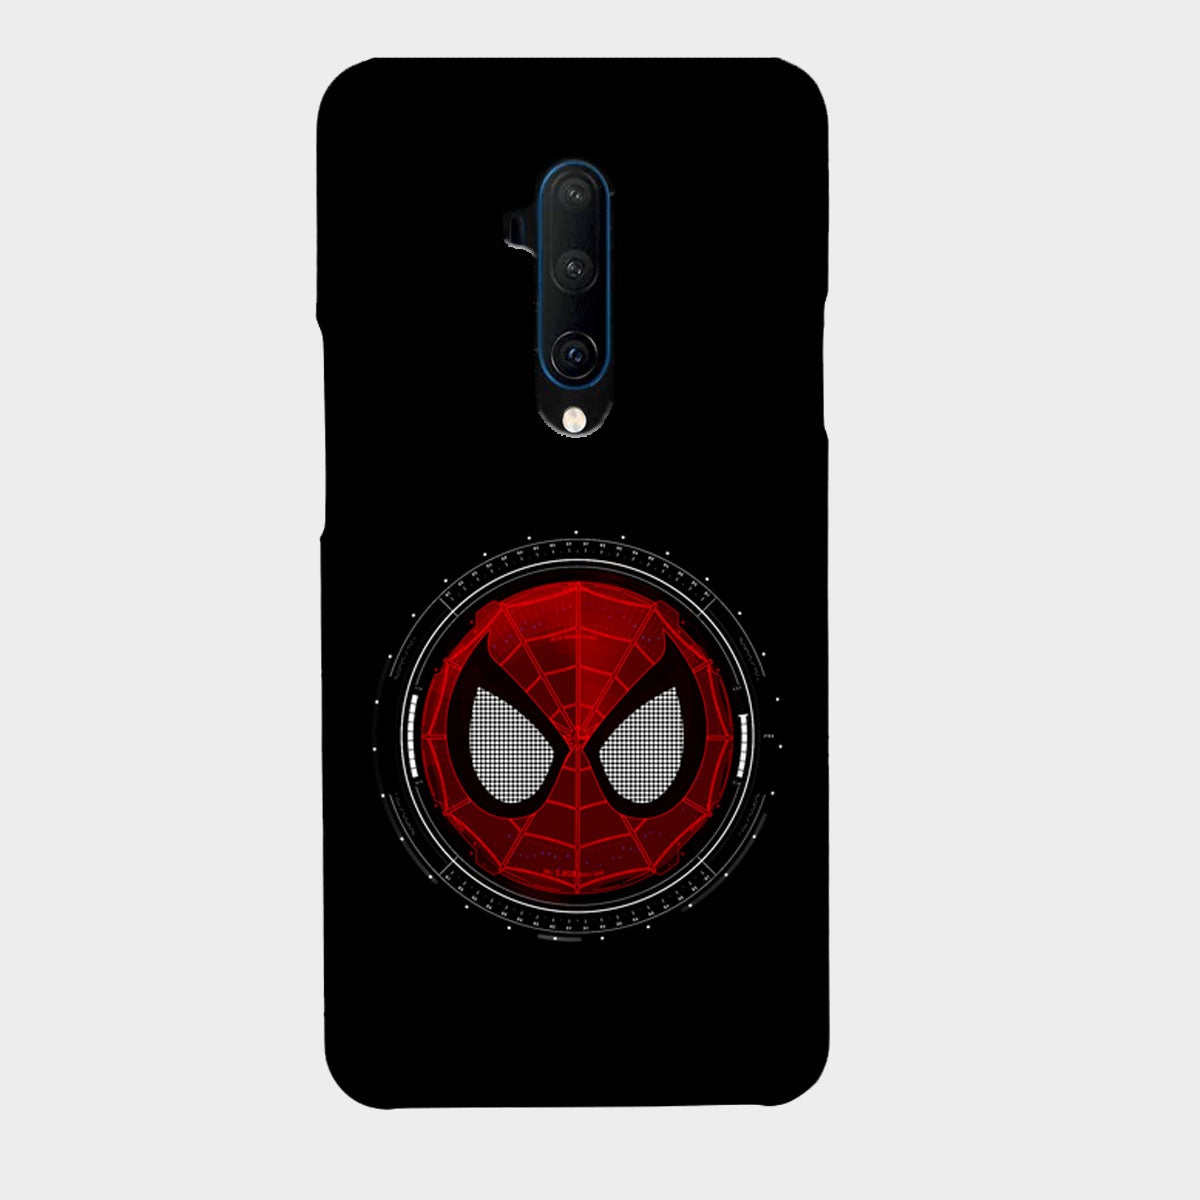 Spider Man - Round - Mobile Phone Cover - Hard Case - OnePlus